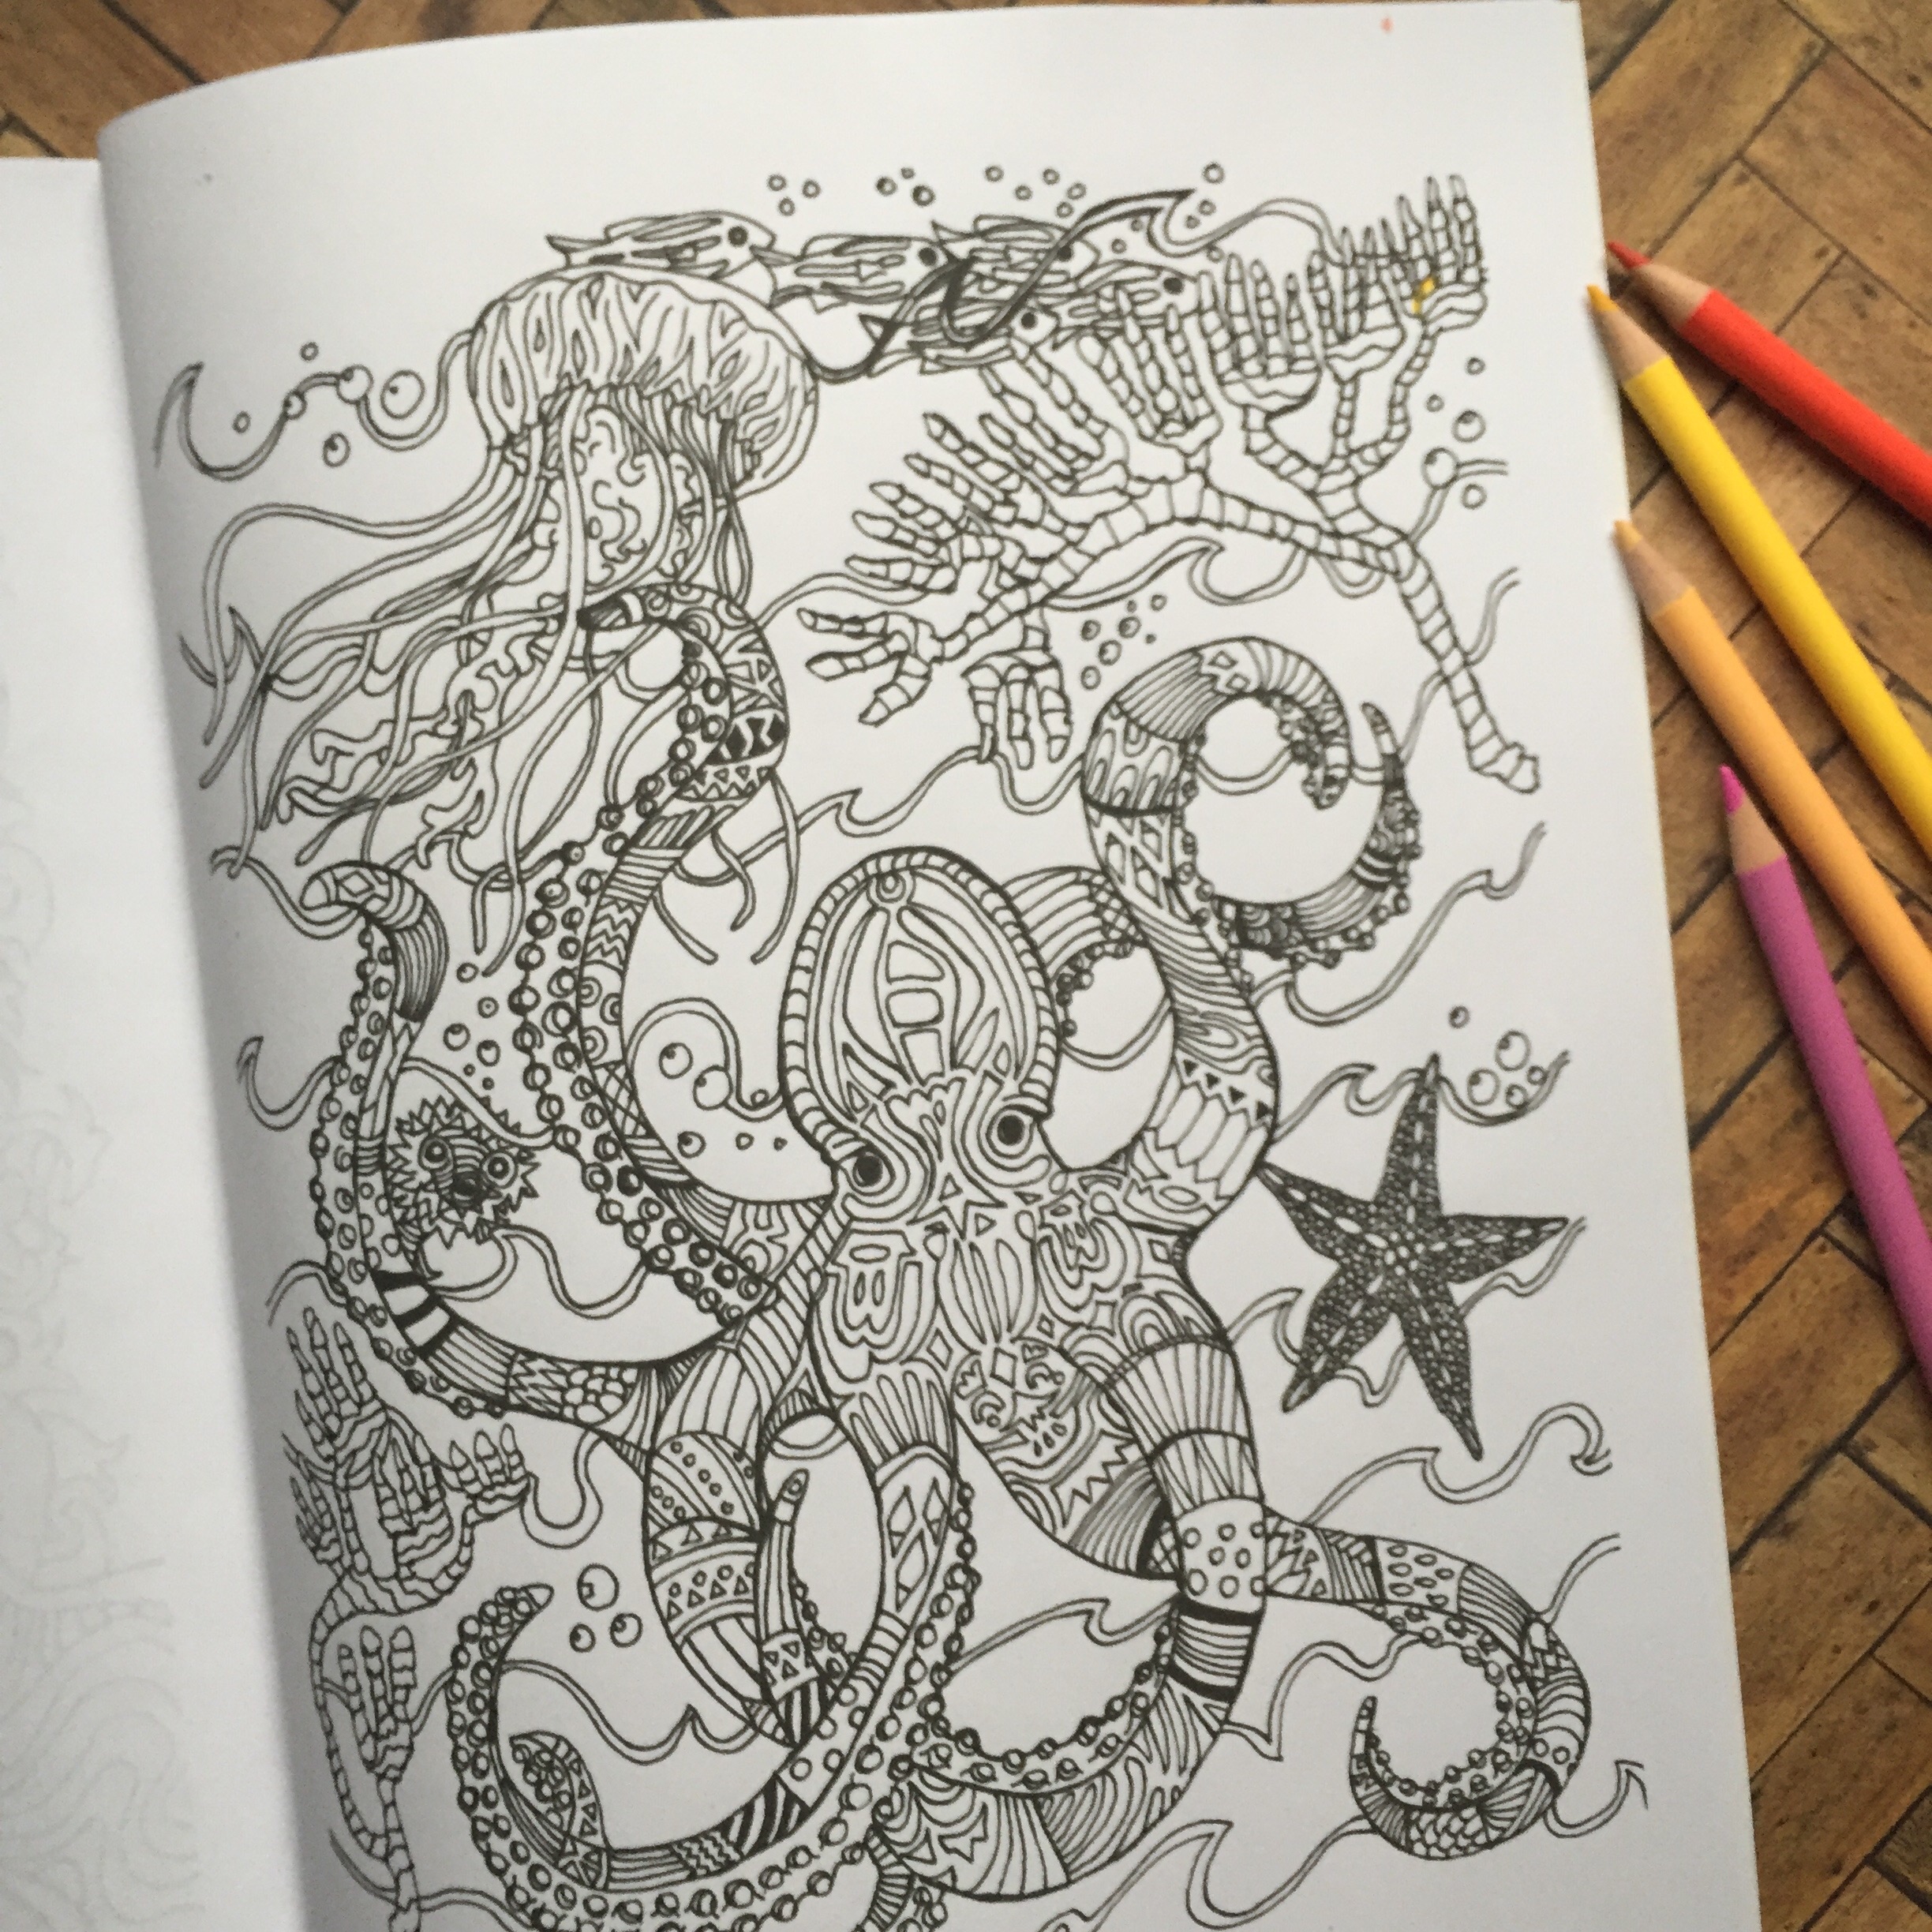 The Zentangle® : relaxing scrawls - Coloring Pages for Adults